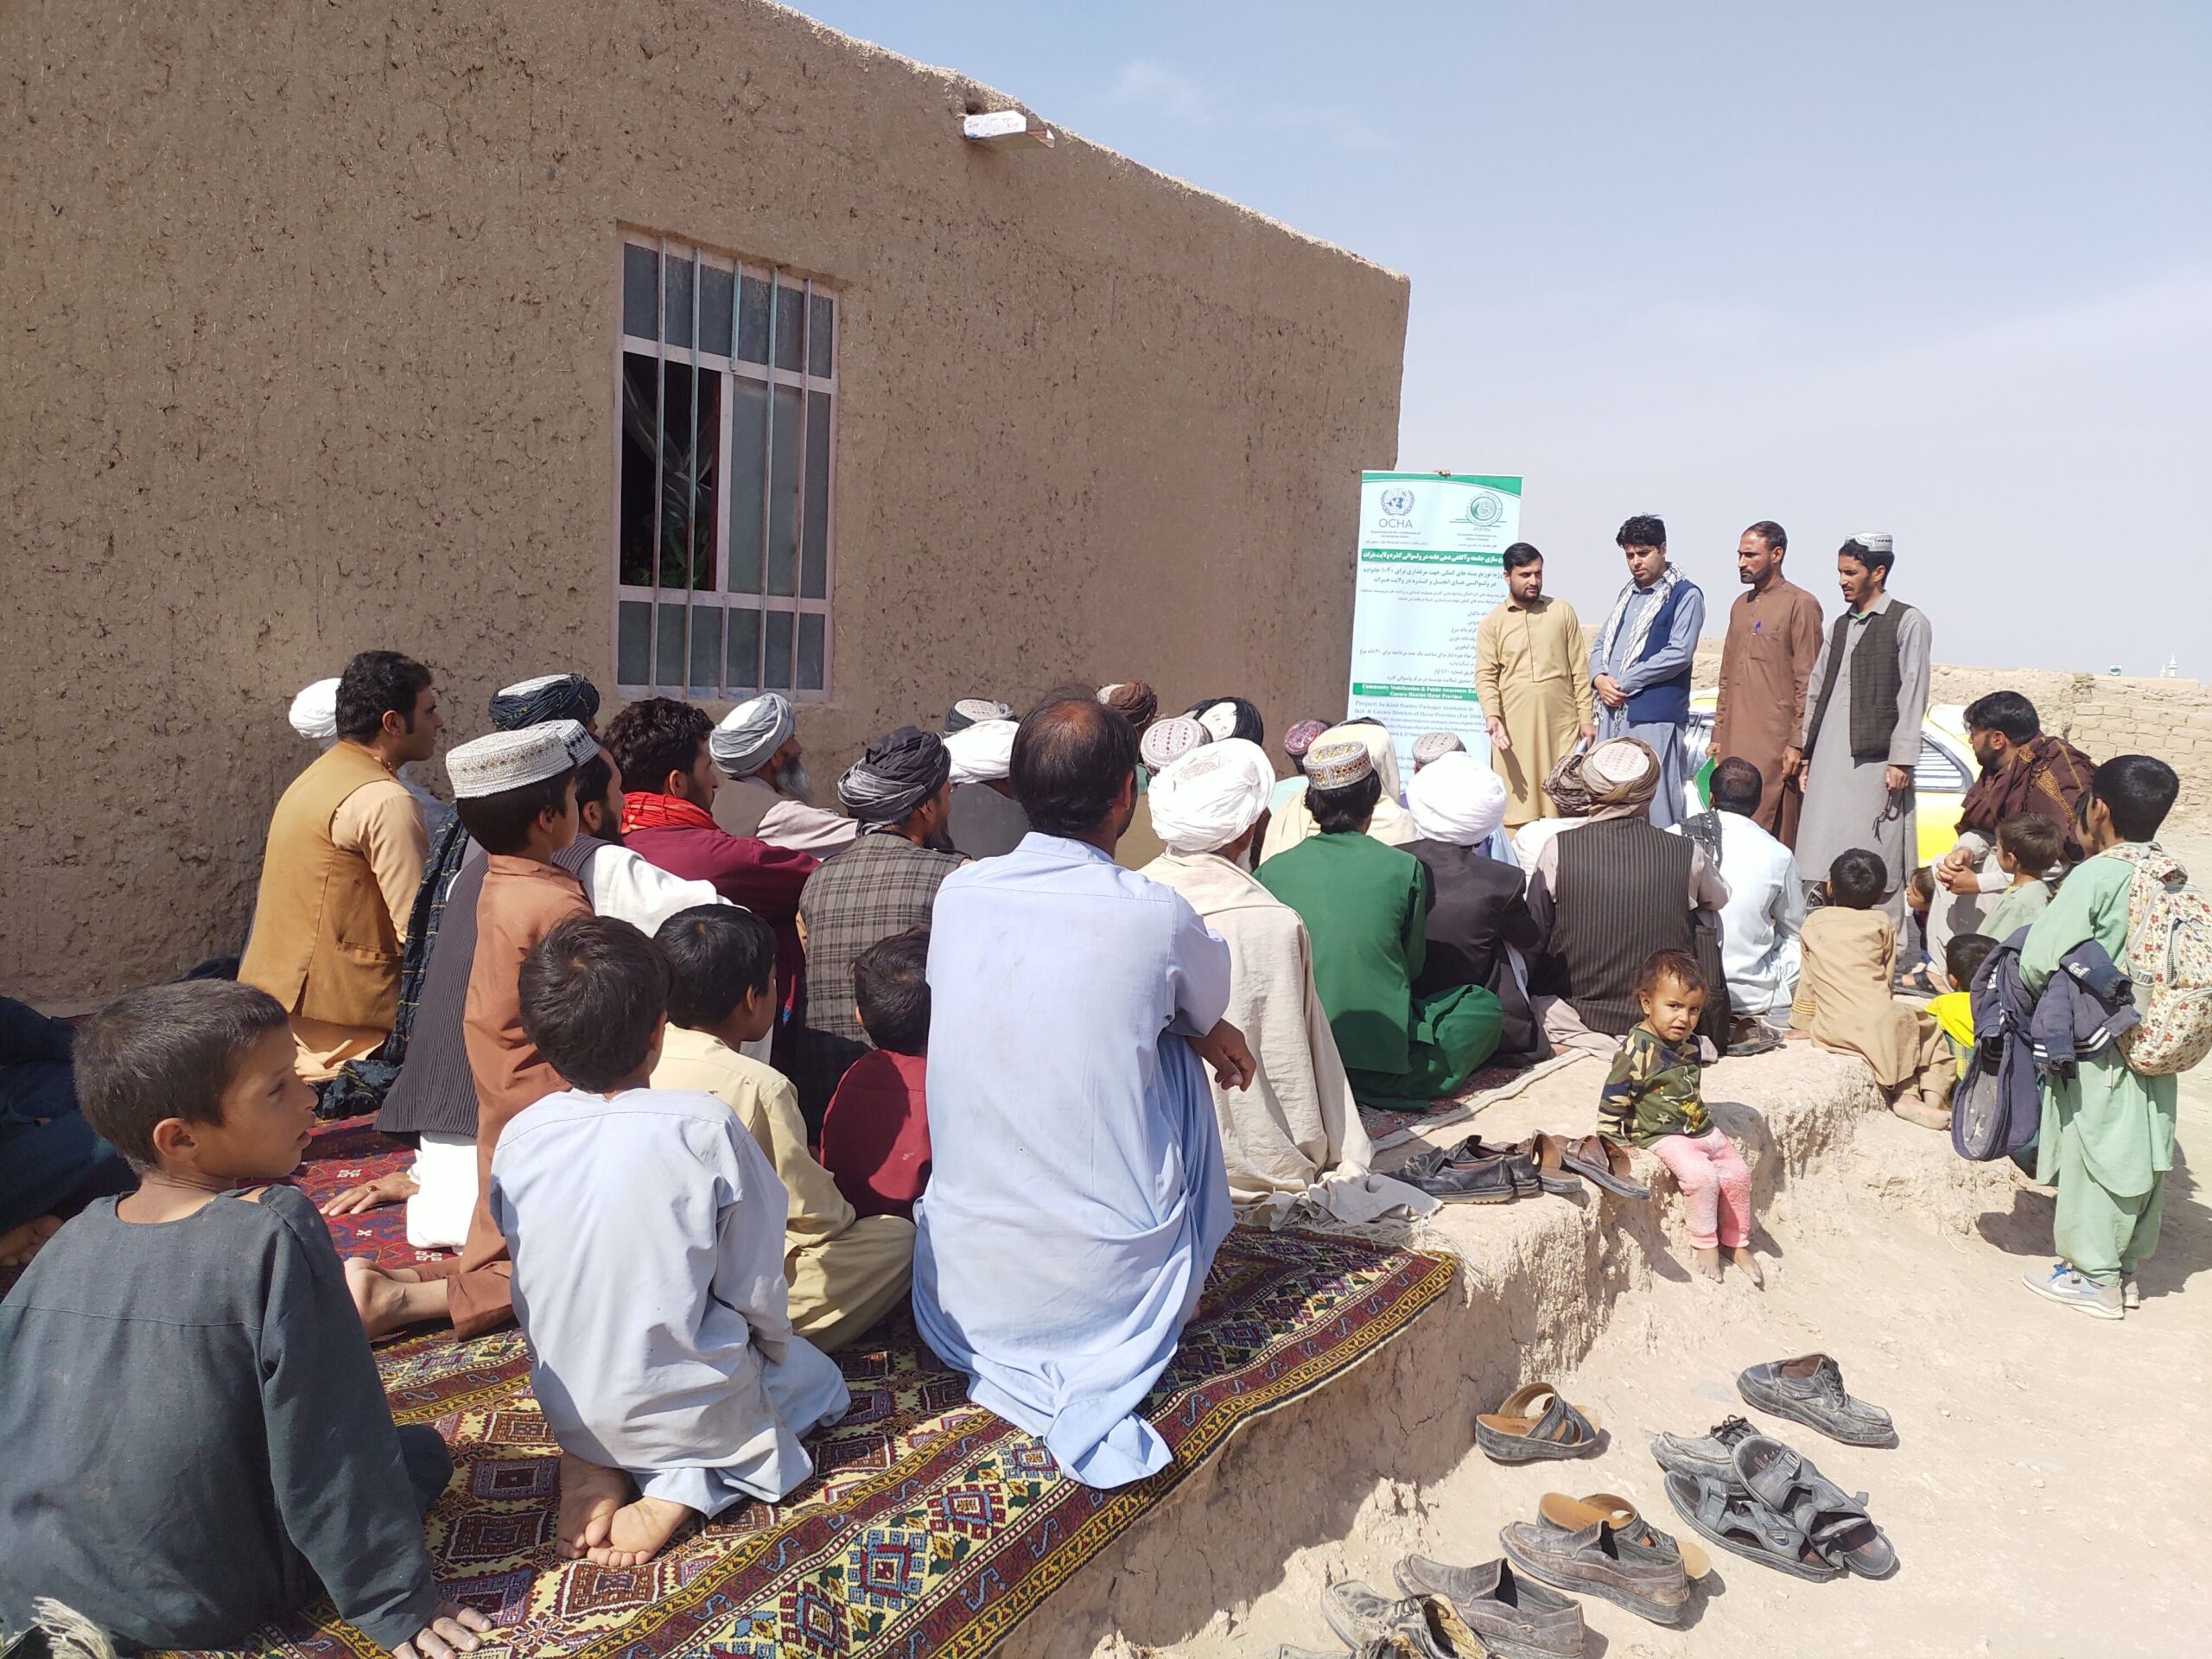 AOAD launched it's In-Kind Poultry Assistance project in Injil and Guzara districts of Herat province